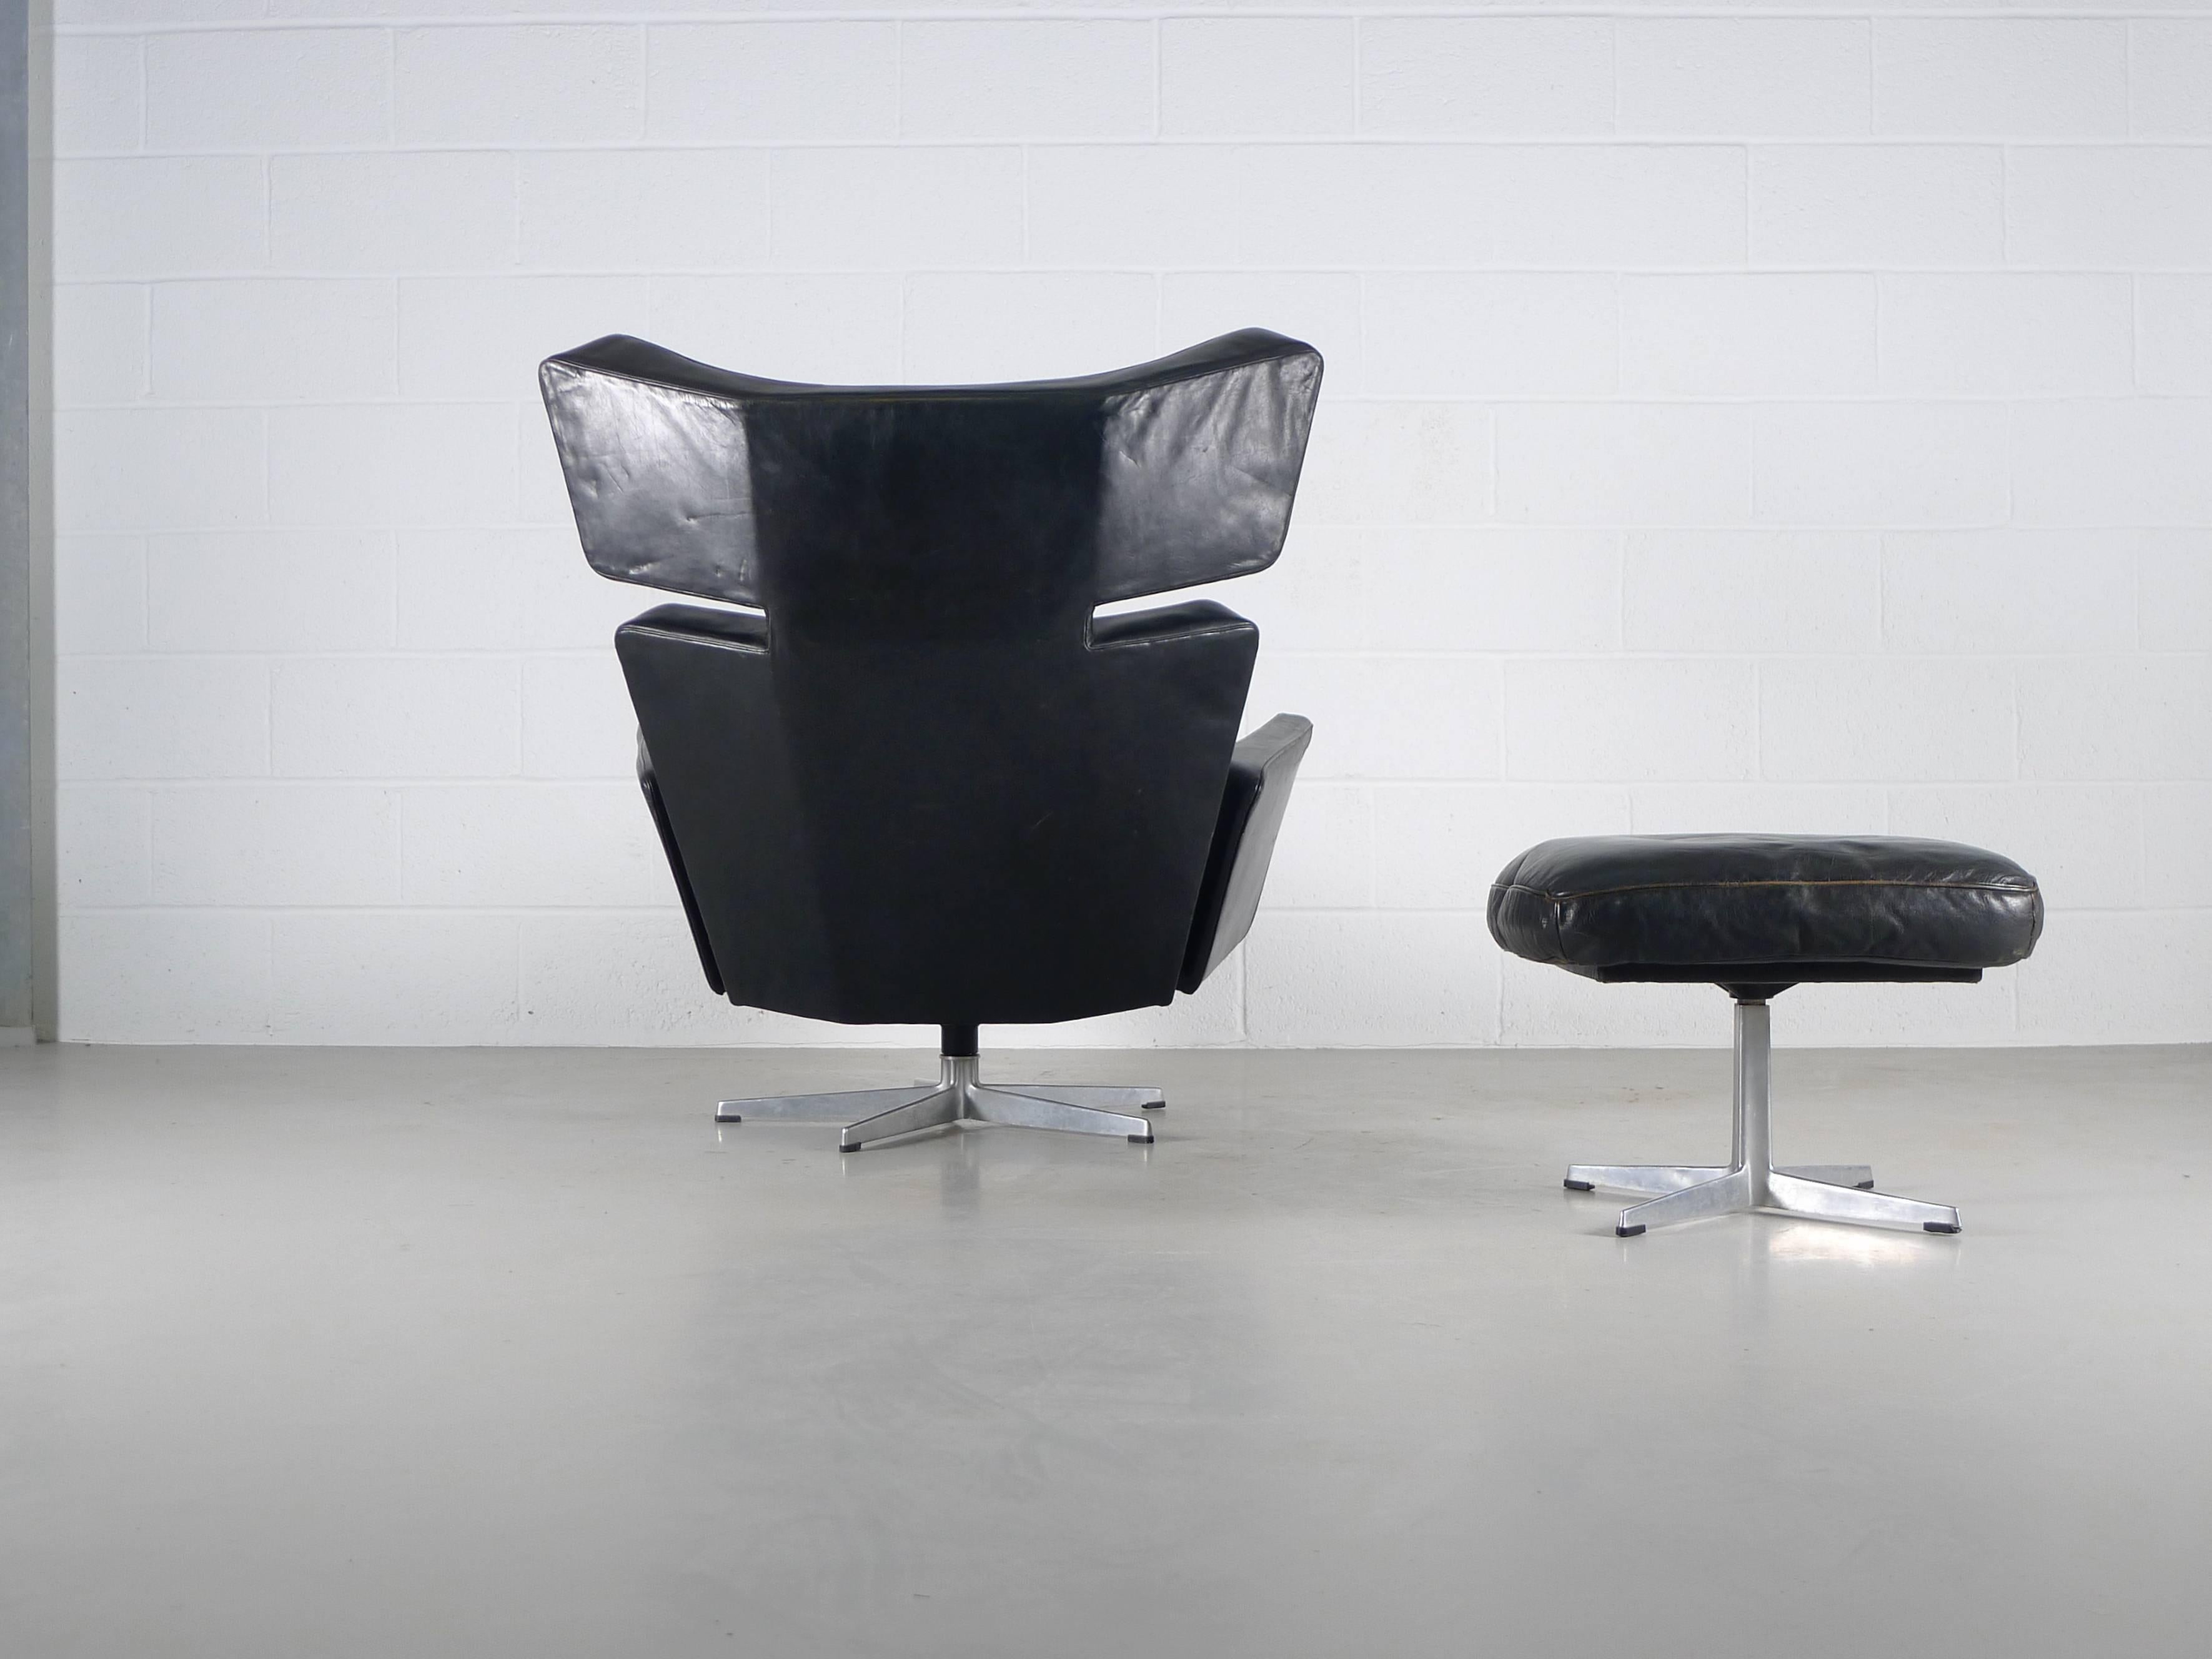 Arne Jacobsen, Denmark, Ox chair and ottoman in original black leather. Both pieces with corresponding labels, 1971.